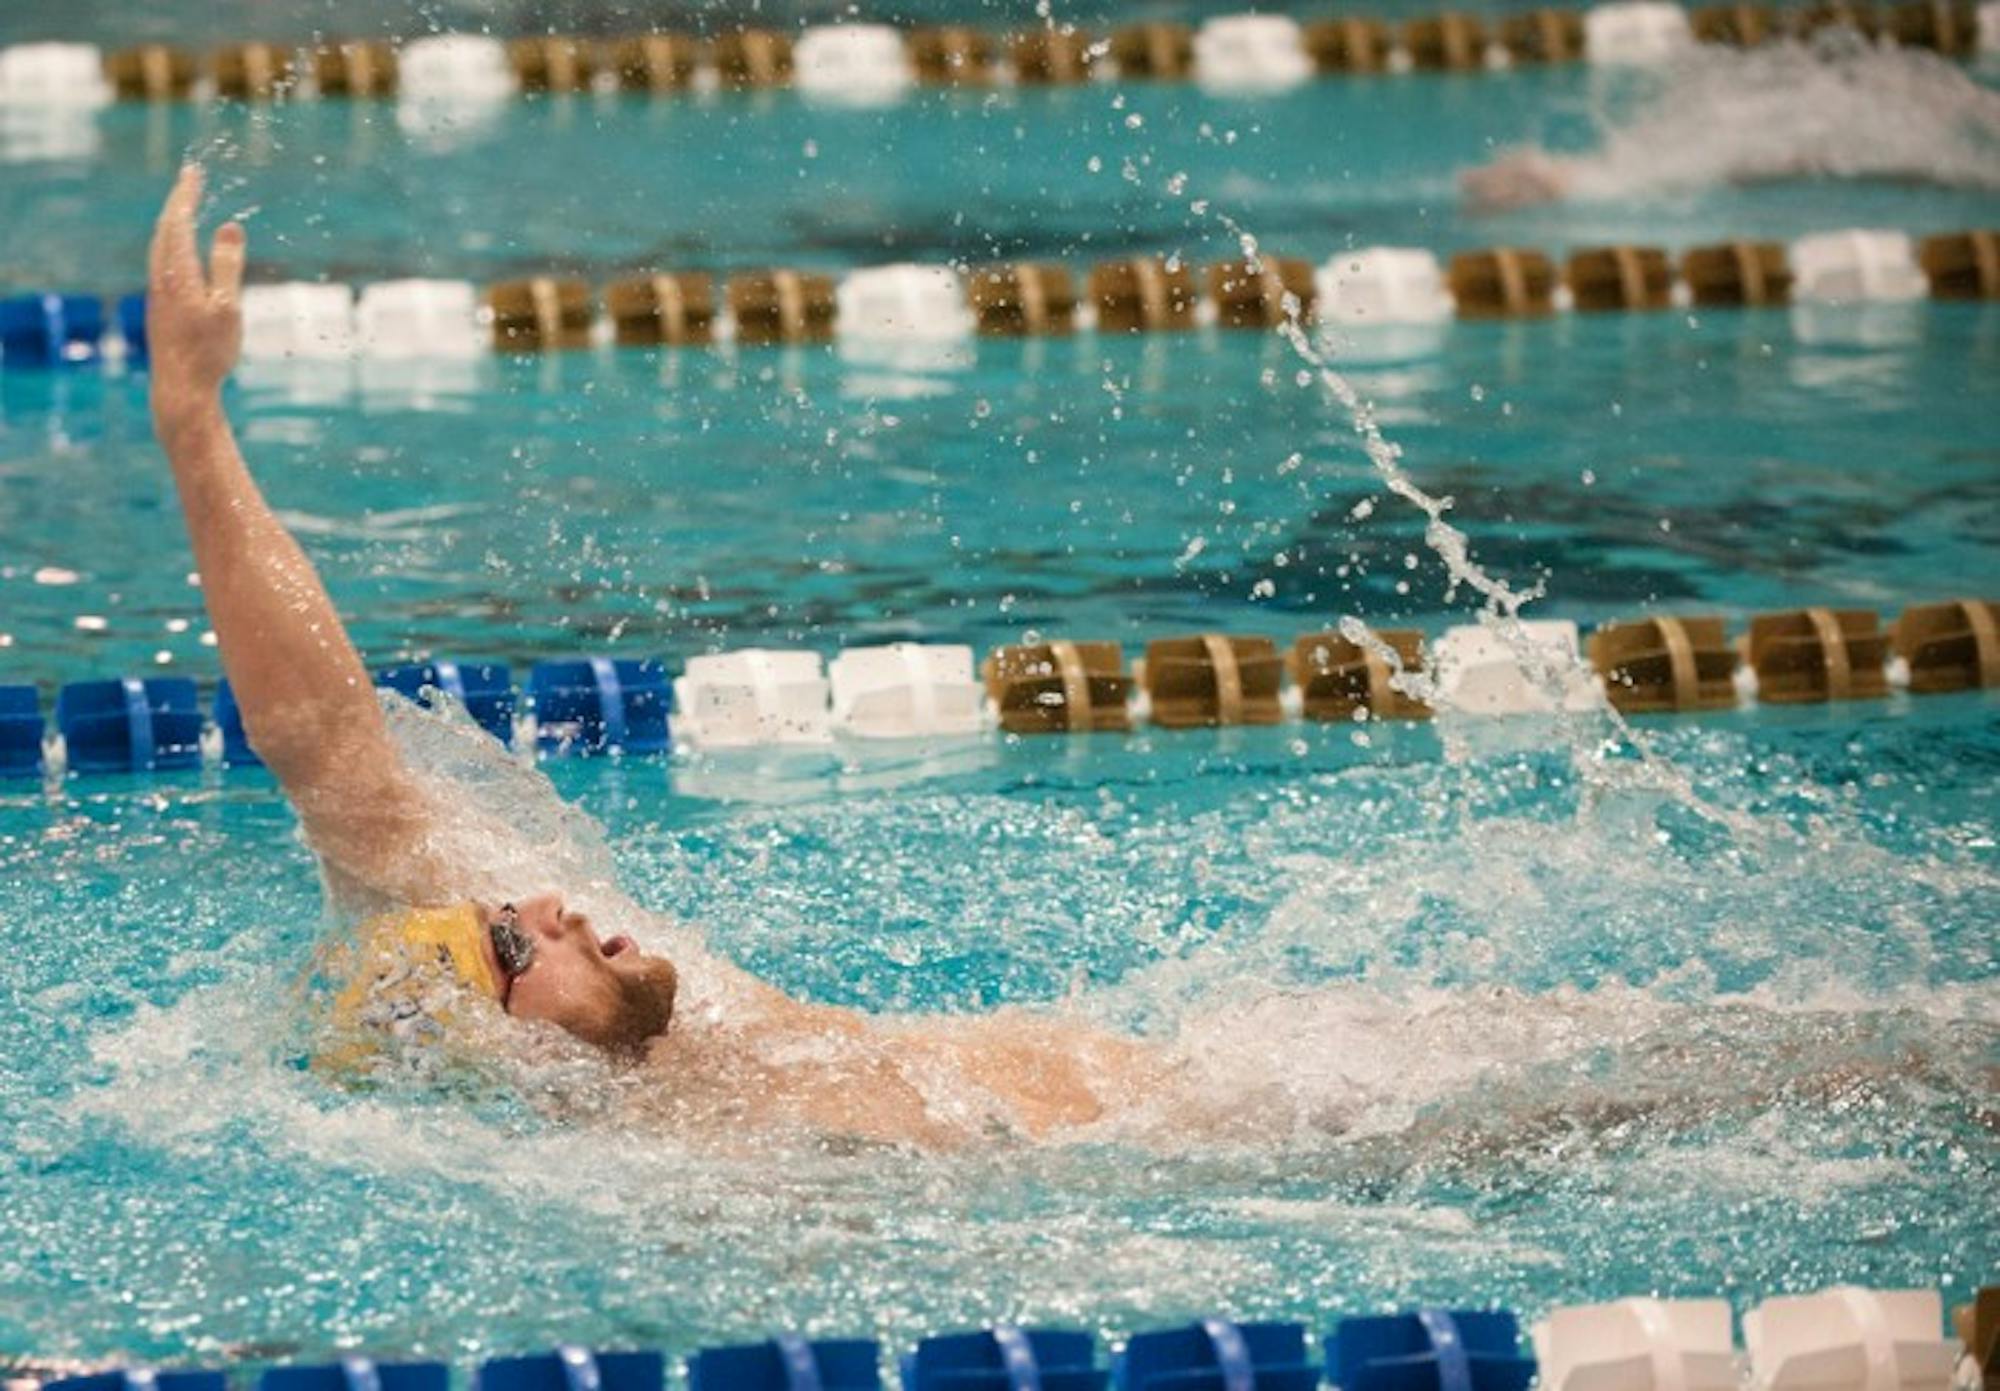 Notre Dame senior John Williamson competes in the men’s 200-yard individual medley race on Feb. 7 at Rolfs Aquatic Center.